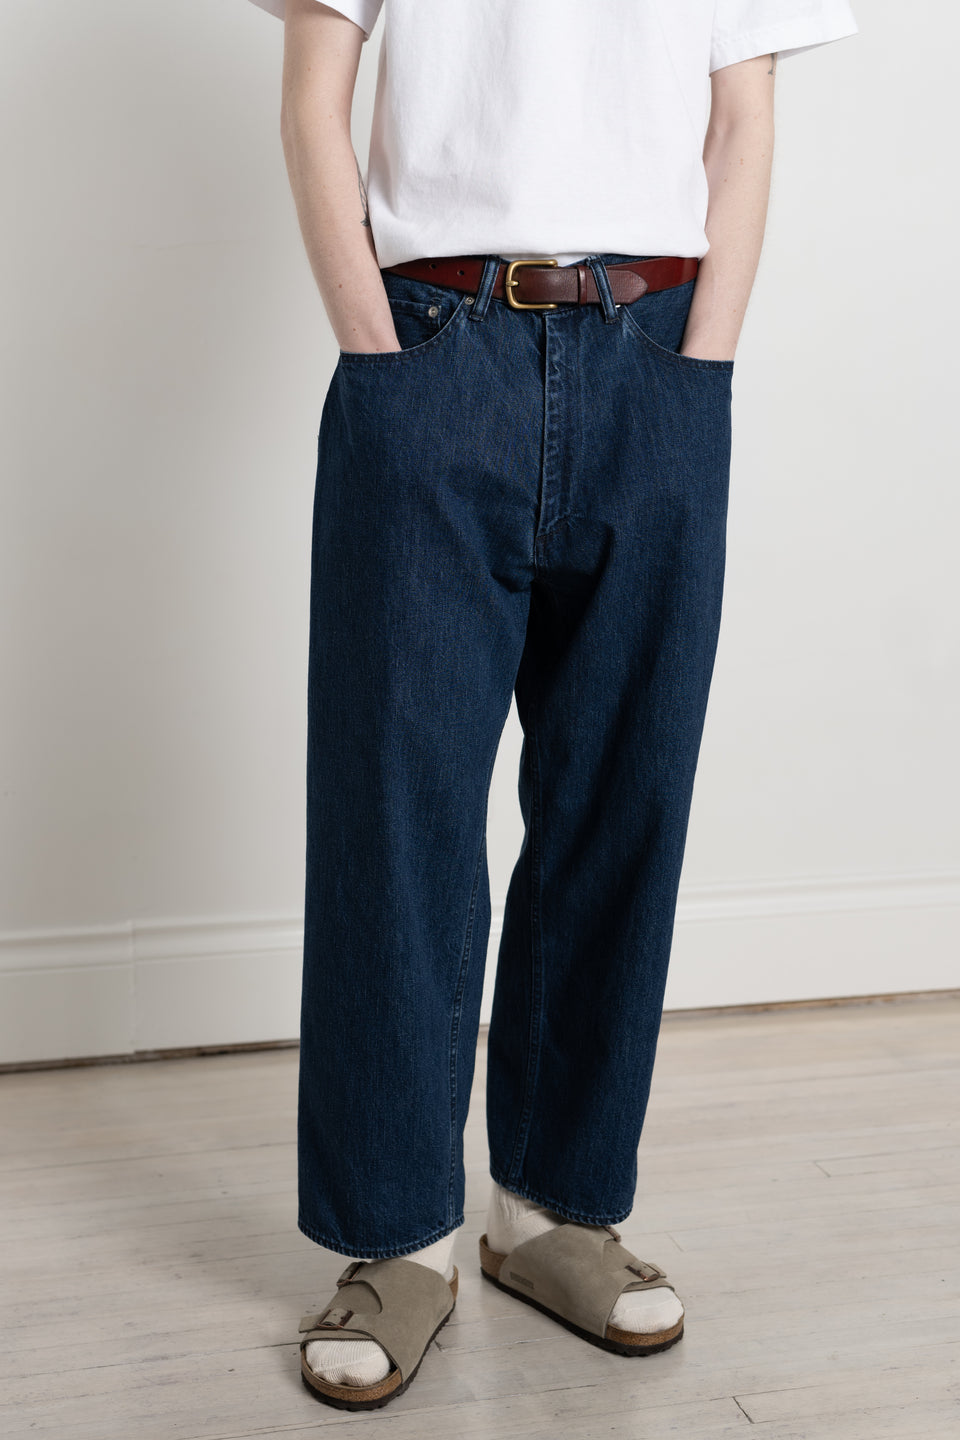 ENDS and MEANS spring summer 2024 SS24 24SS Men's Collection from Japan 5 pockets baggy denim washed indigo